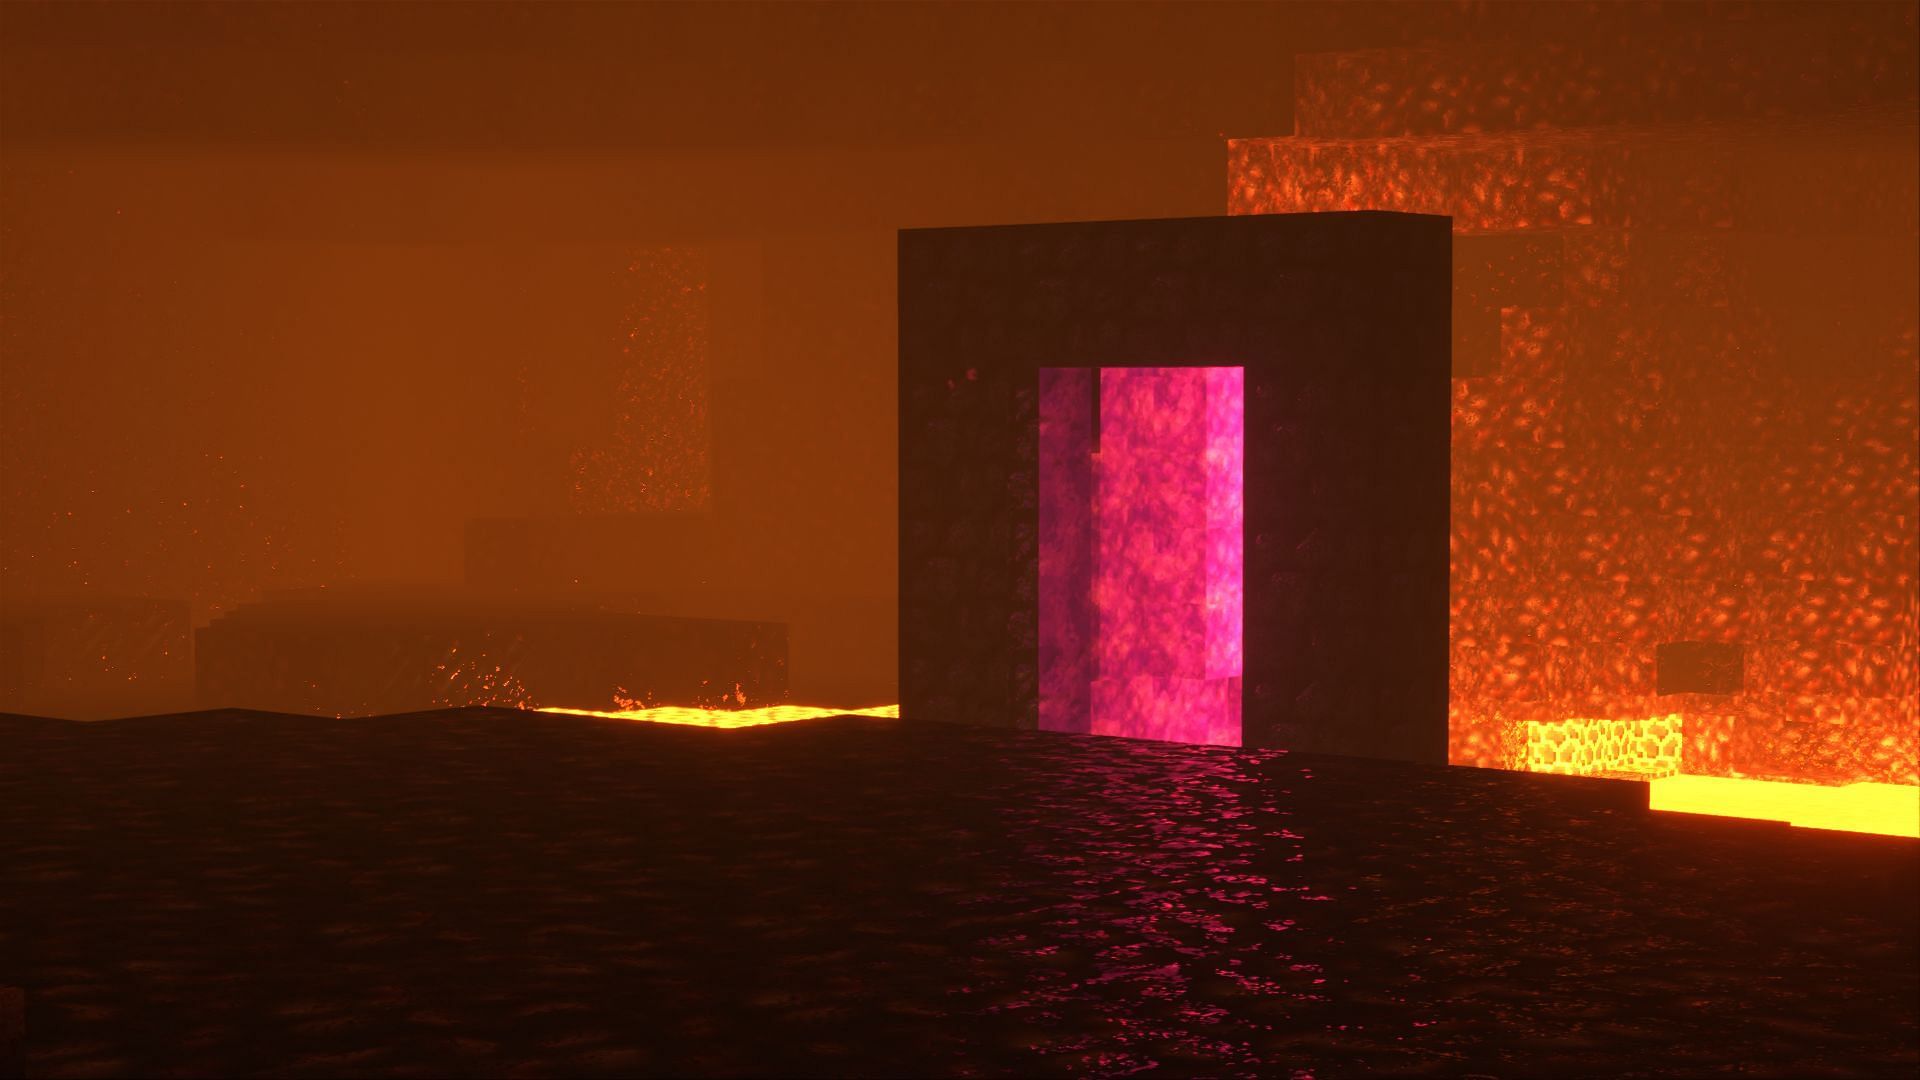 The Nether Portal in Minecraft (Image via Wallpapercave)